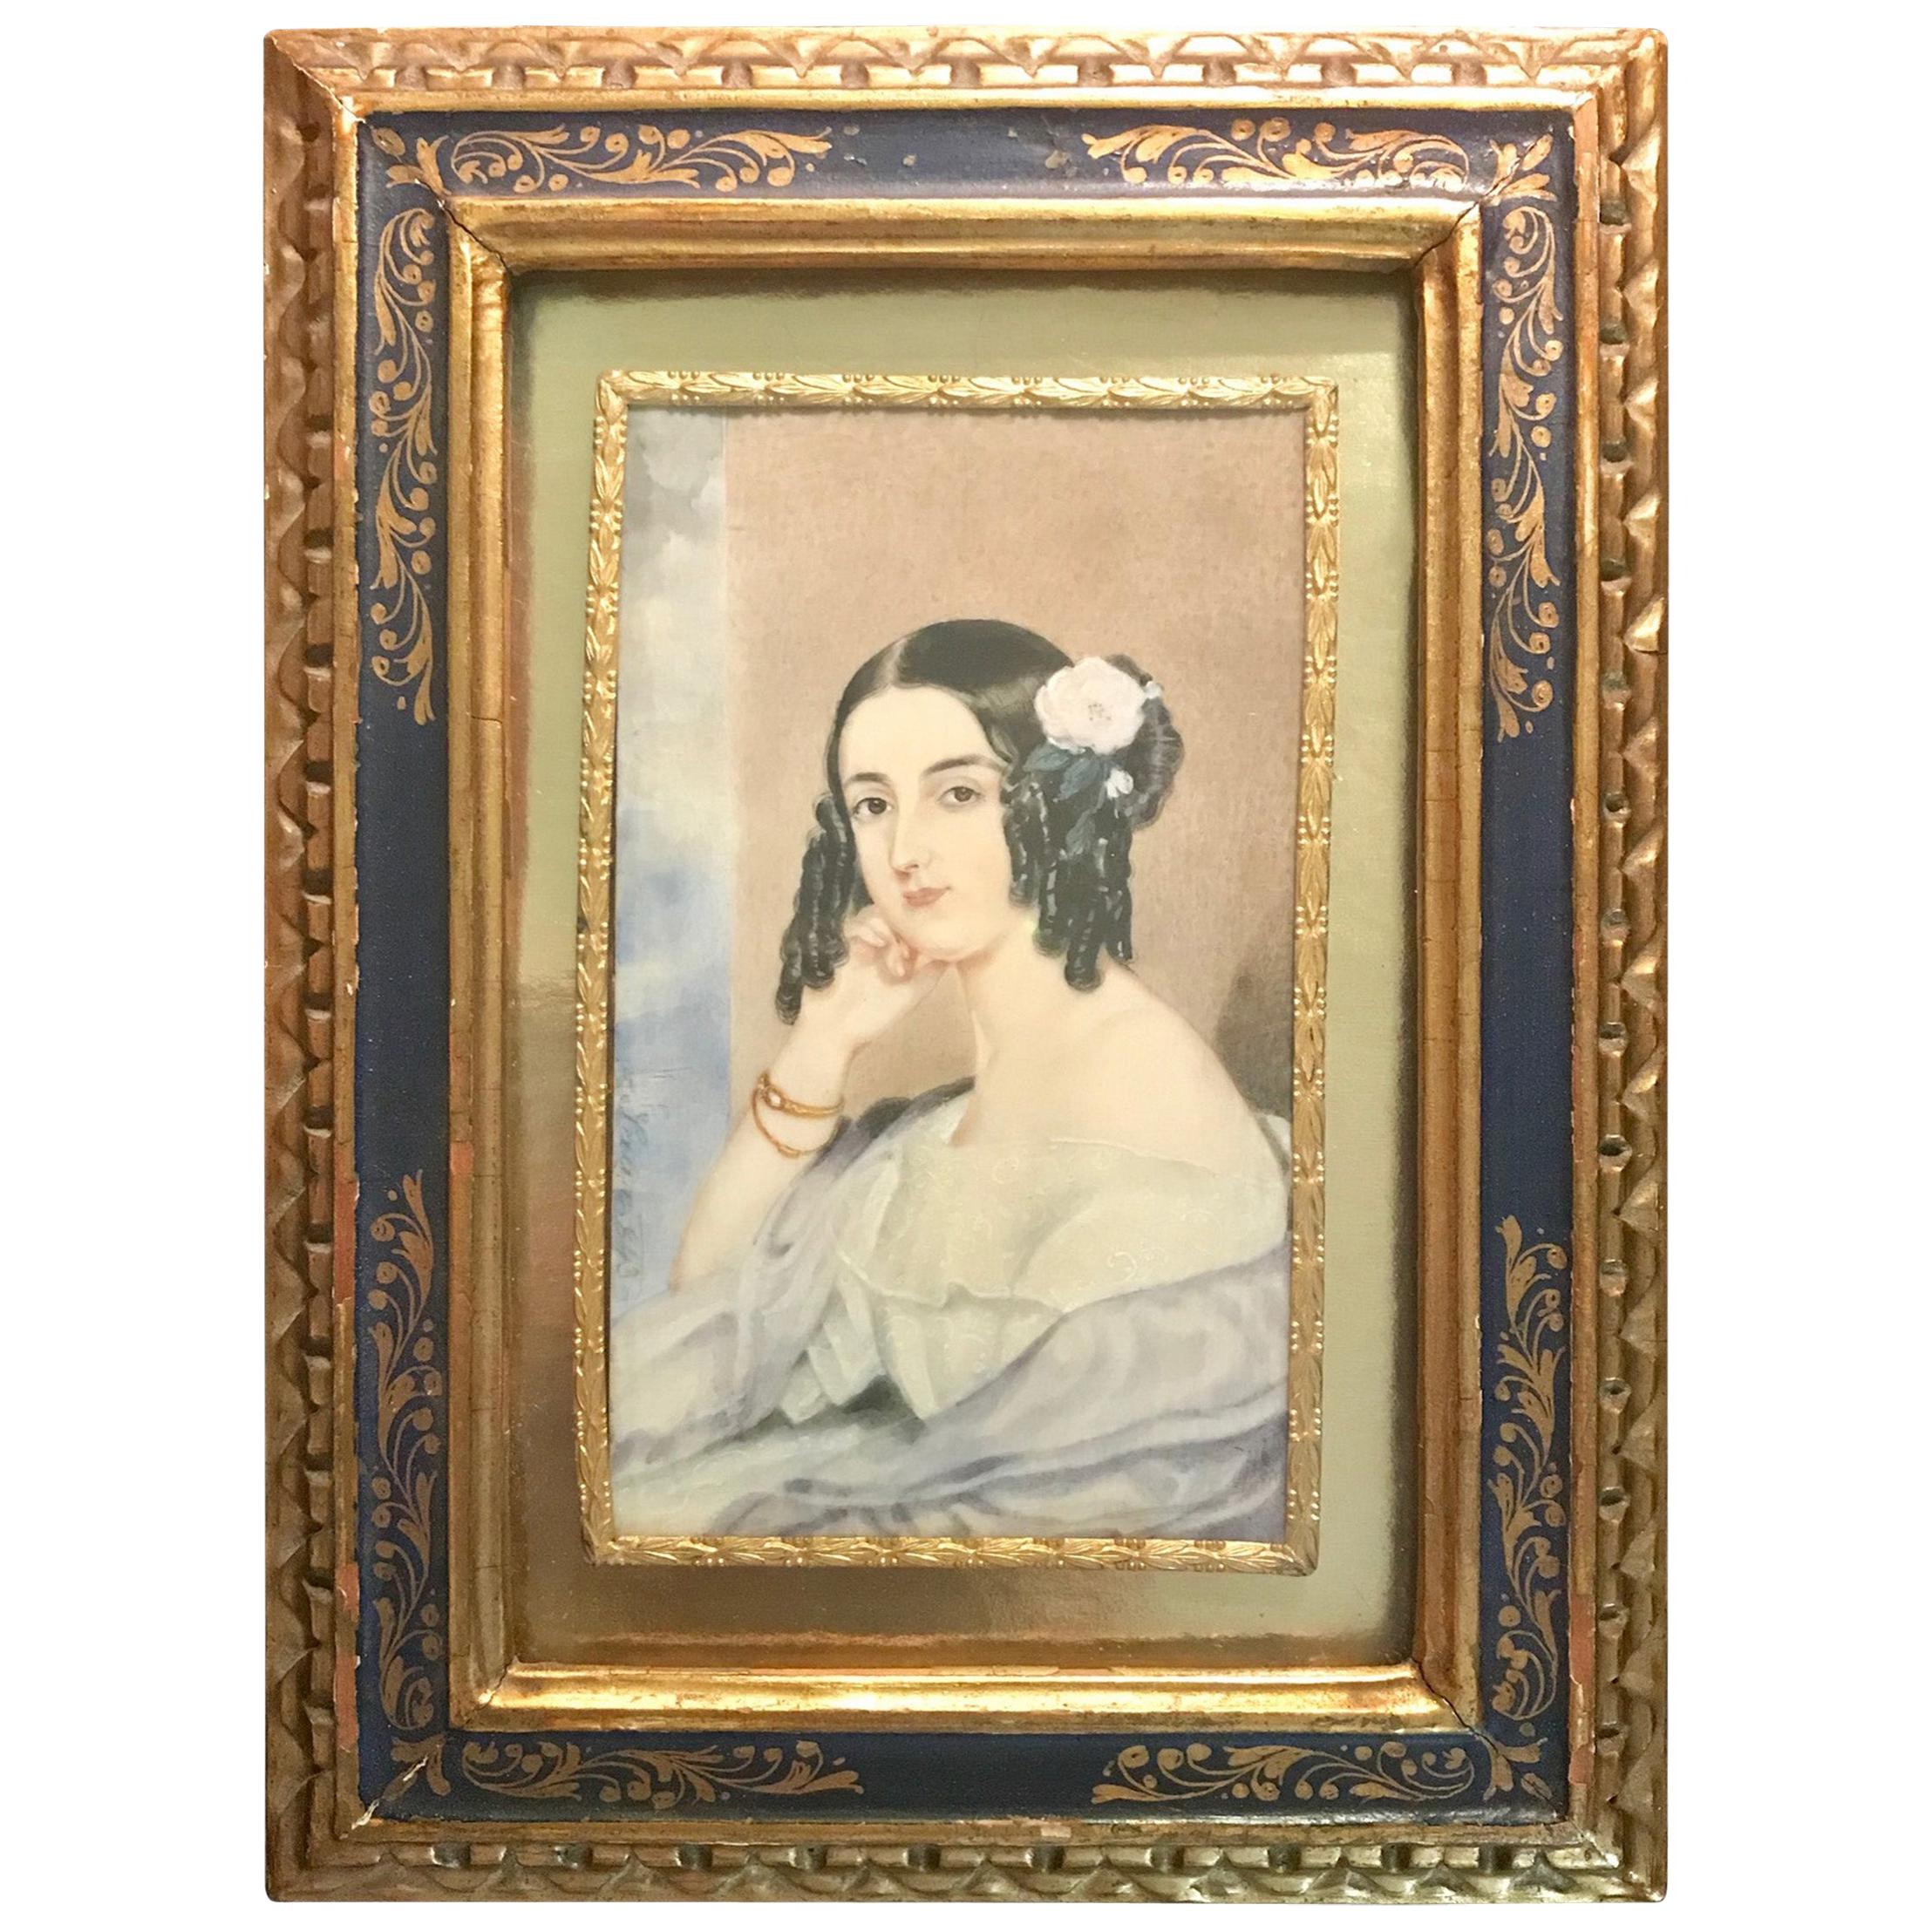 Miniature Portrait Painting, Biedermeier Young Lady, Dated and Signed, Vienna